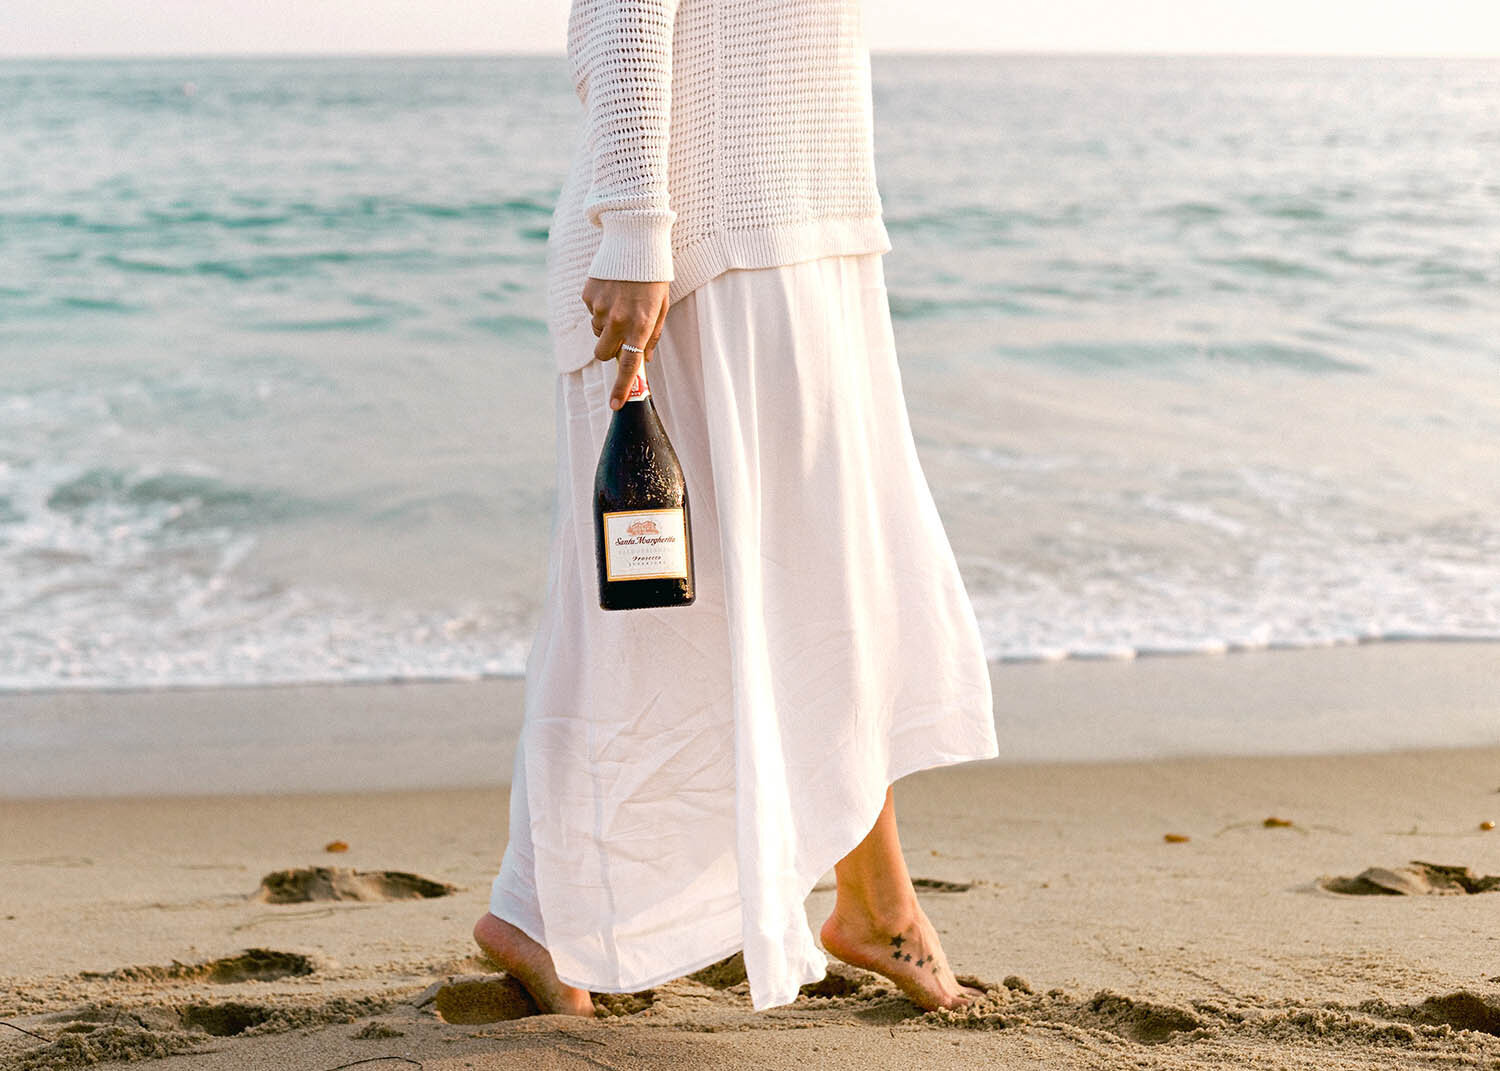 Wine at the beach with a girl walking by the ocean